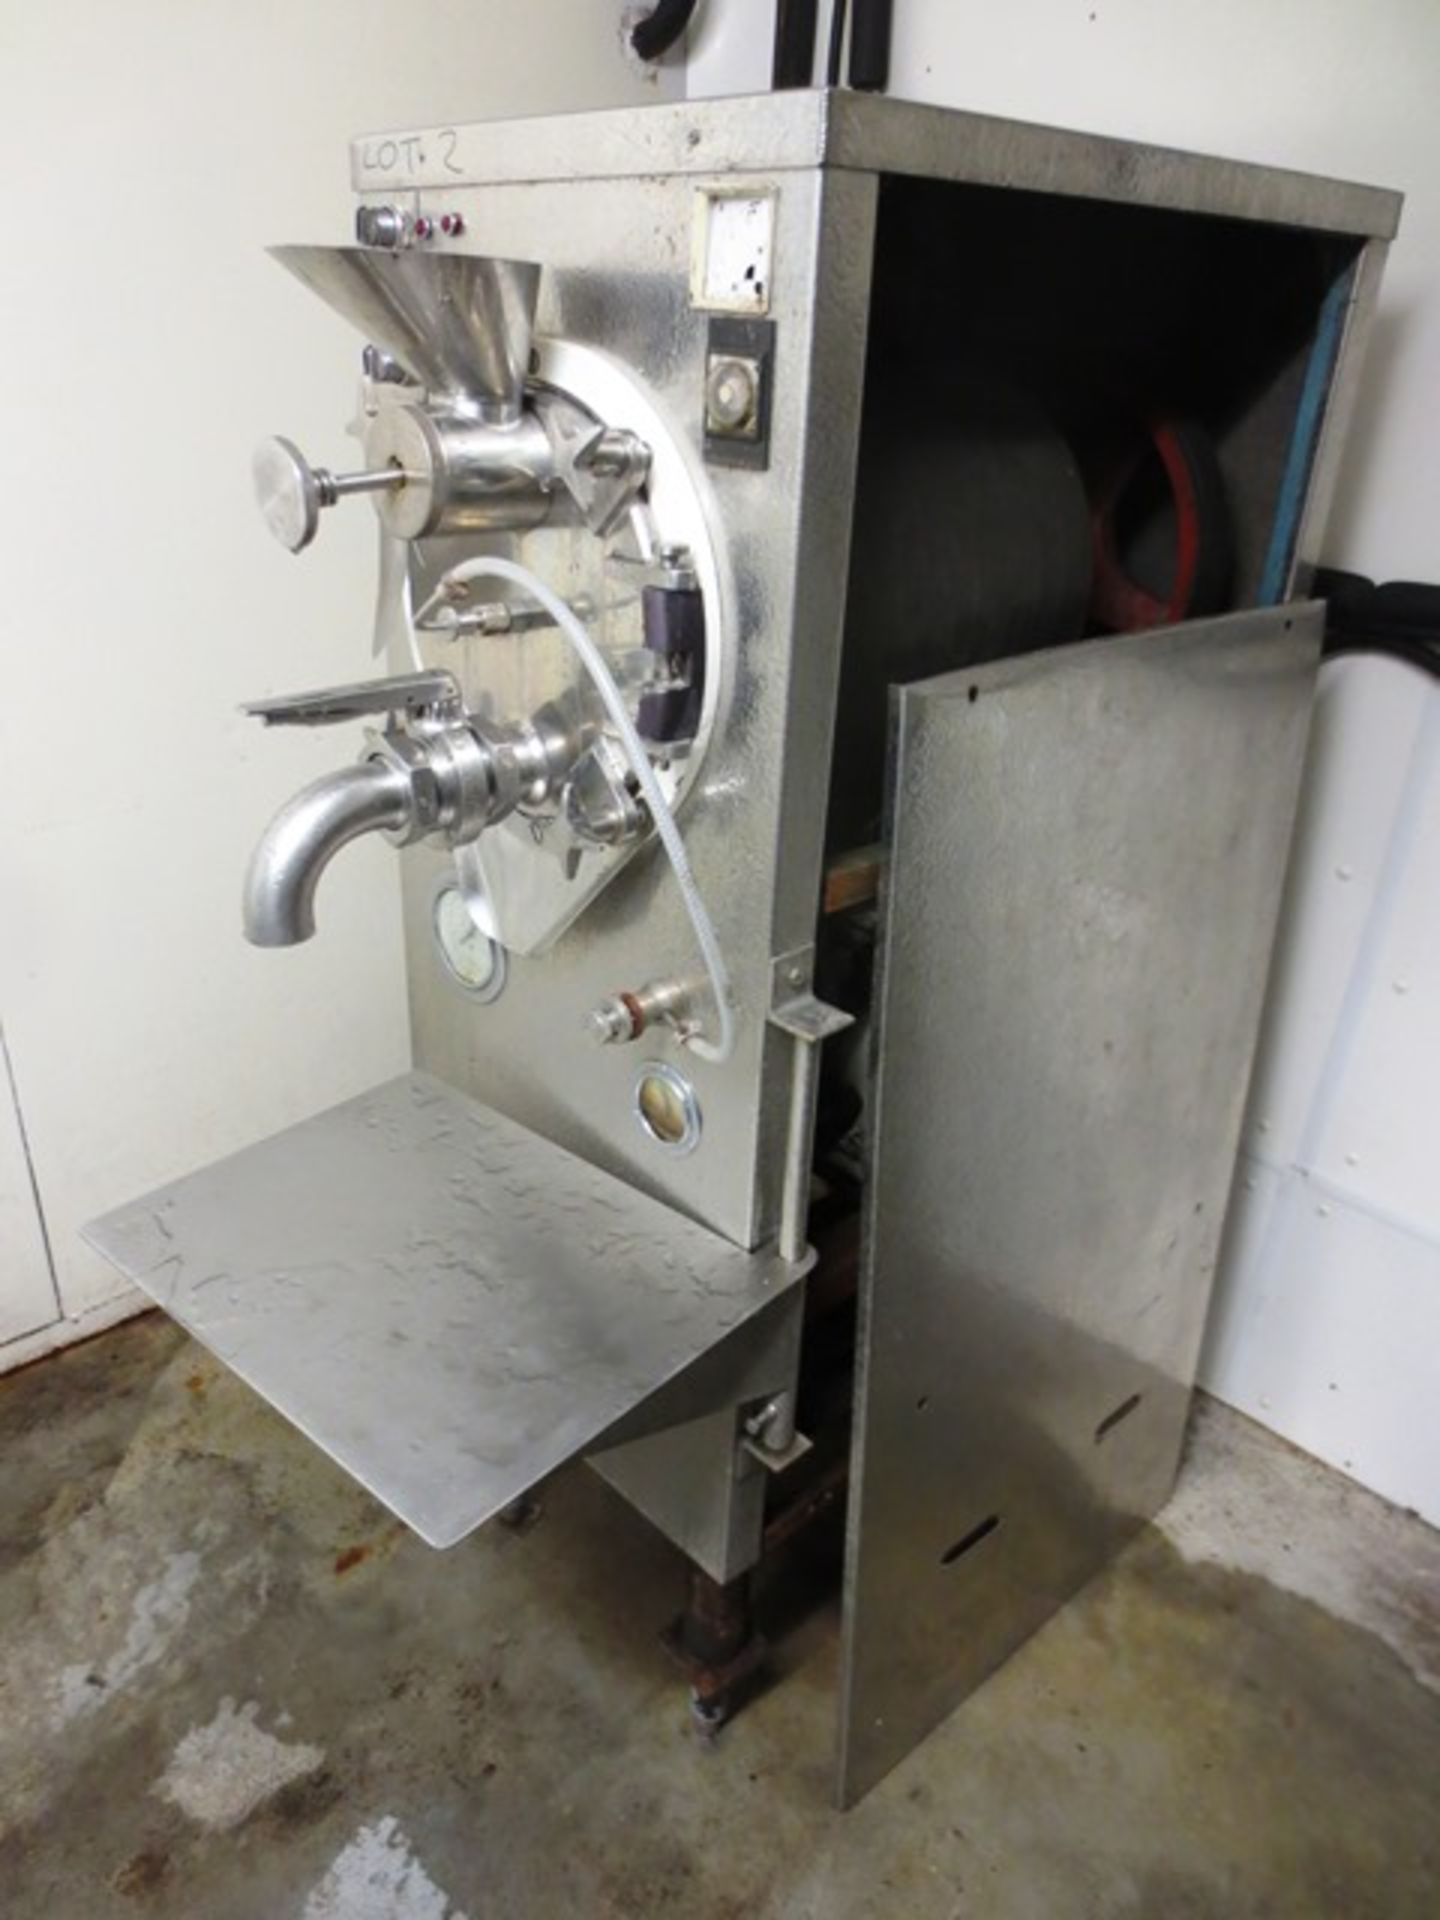 Un-named stainless steel pressurised, refrigerated ice cream batch filler, infeed hopper and - Image 2 of 4